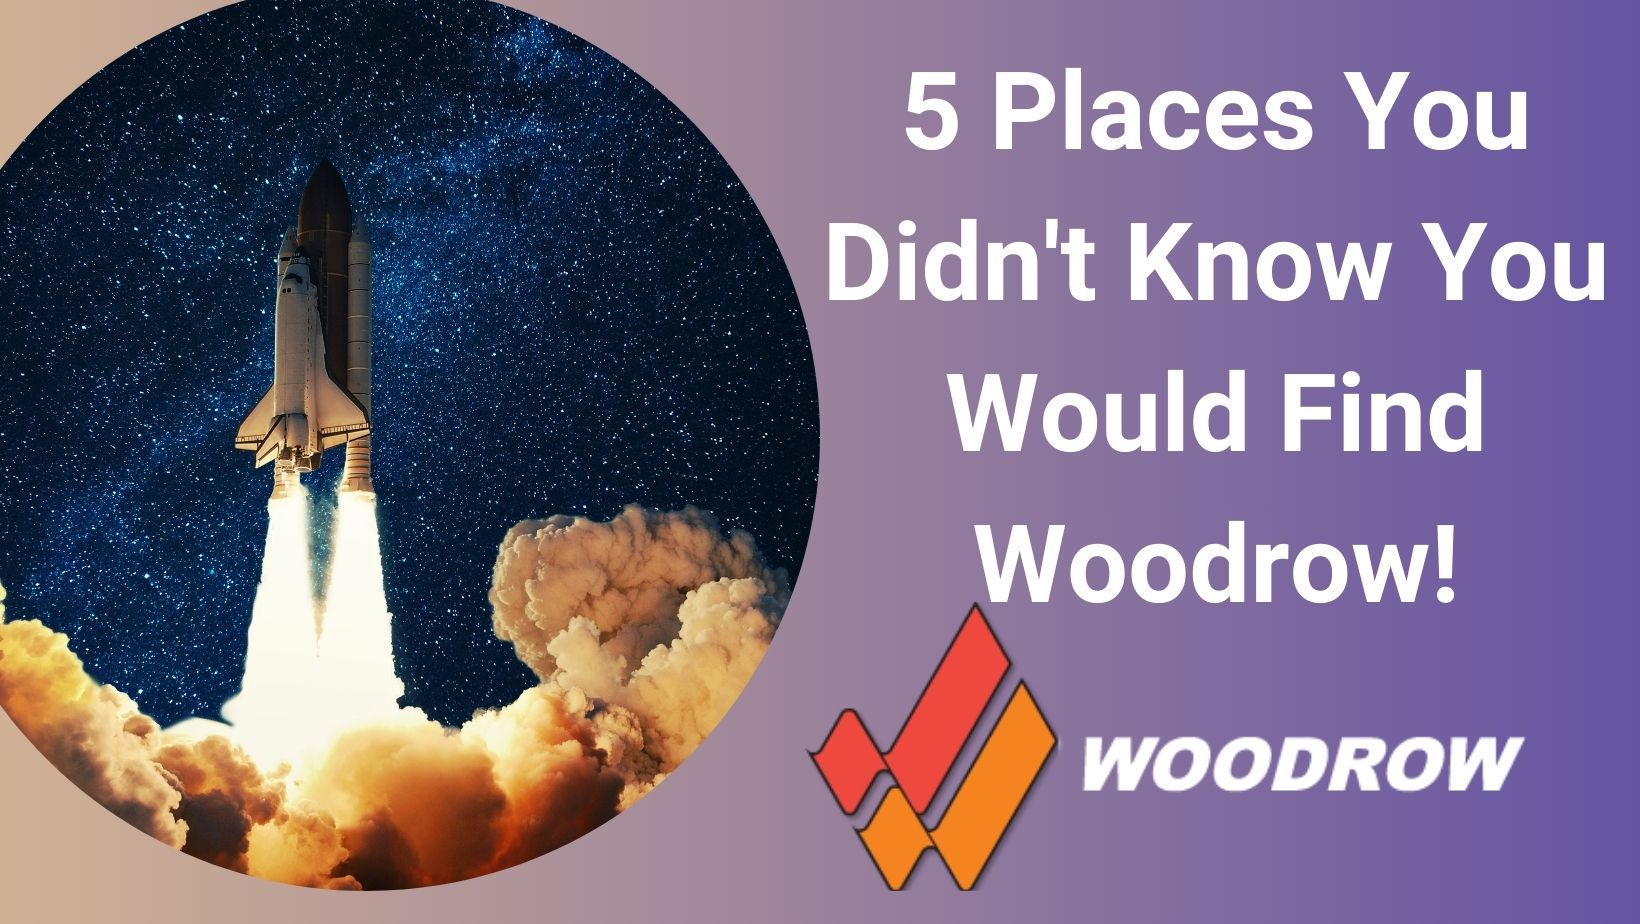 Five places you didn't know you would find Woodrow!